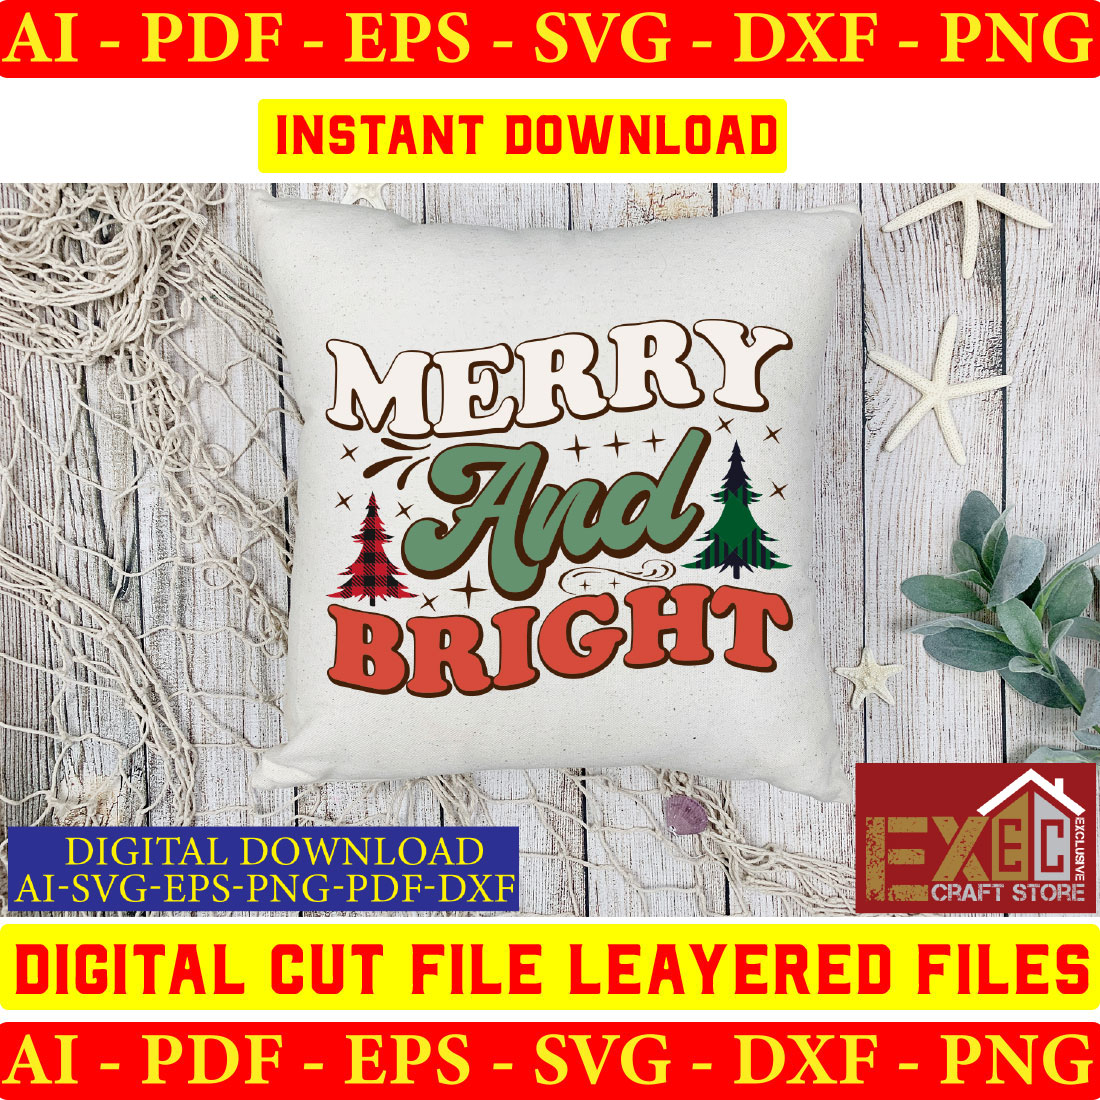 Merry old bright digital cut file layered files.